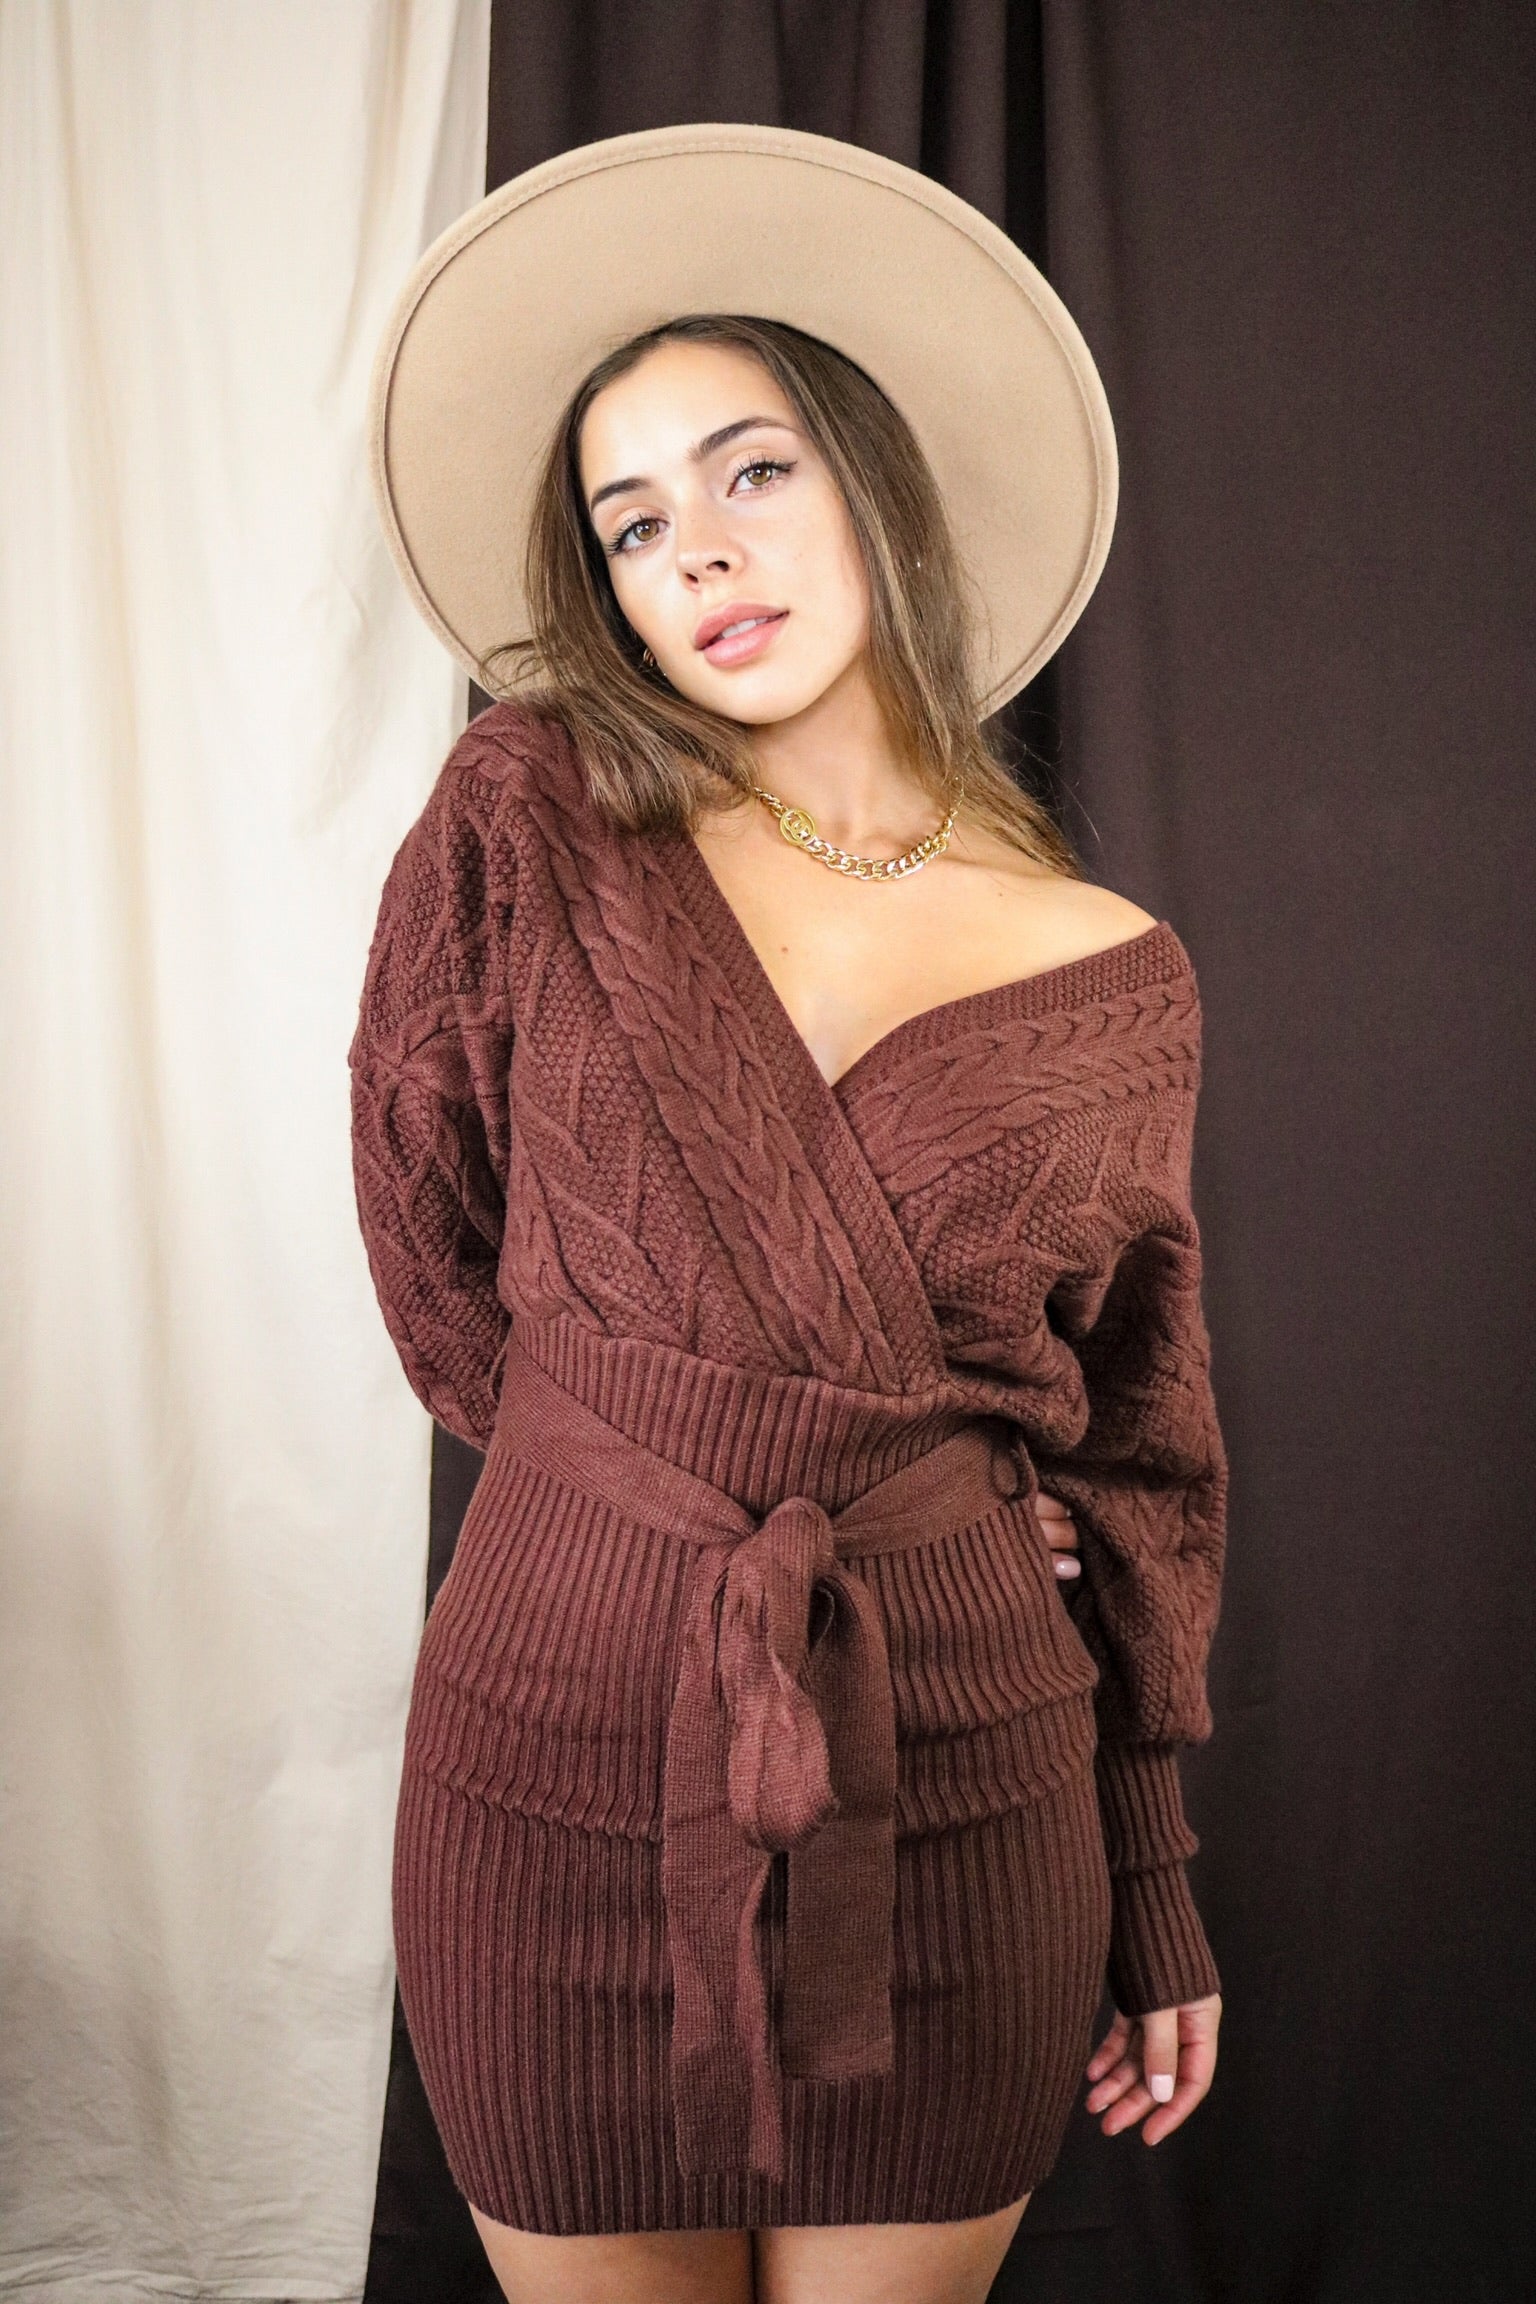 Cable Knit Off The Shoulder Sweater Dress in Cocoa. Ribbed with waist tie. Scarlette The Label, an online fashion boutique and label for women.